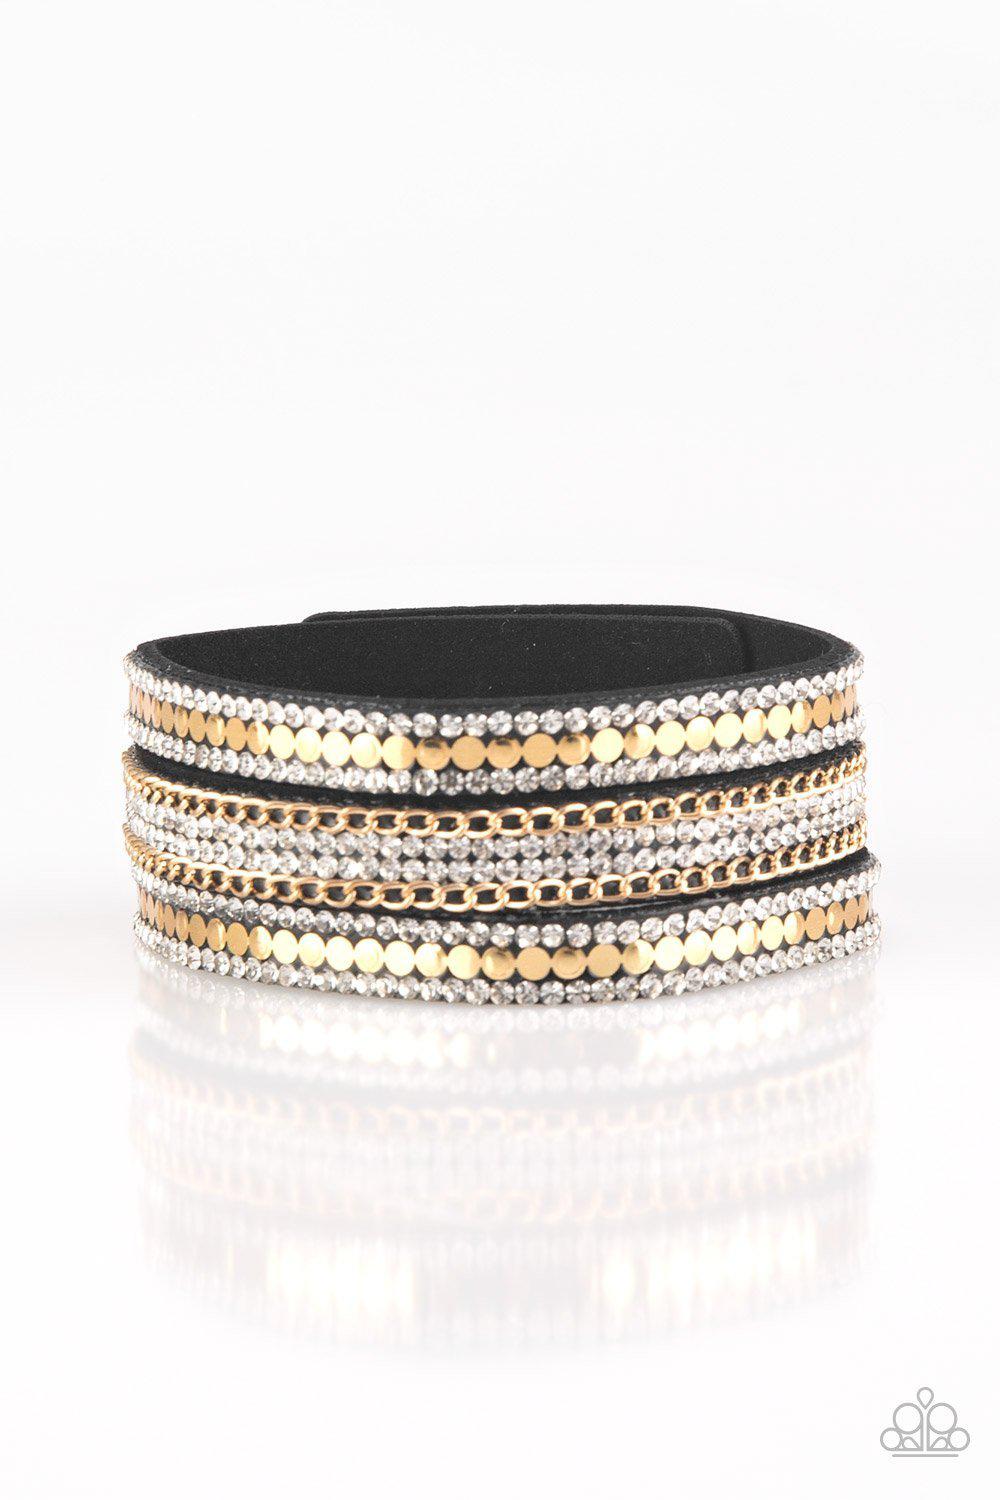 Fashion Fanatic Gold, White and Black Urban Wrap Snap Bracelet - Paparazzi Accessories- lightbox - CarasShop.com - $5 Jewelry by Cara Jewels